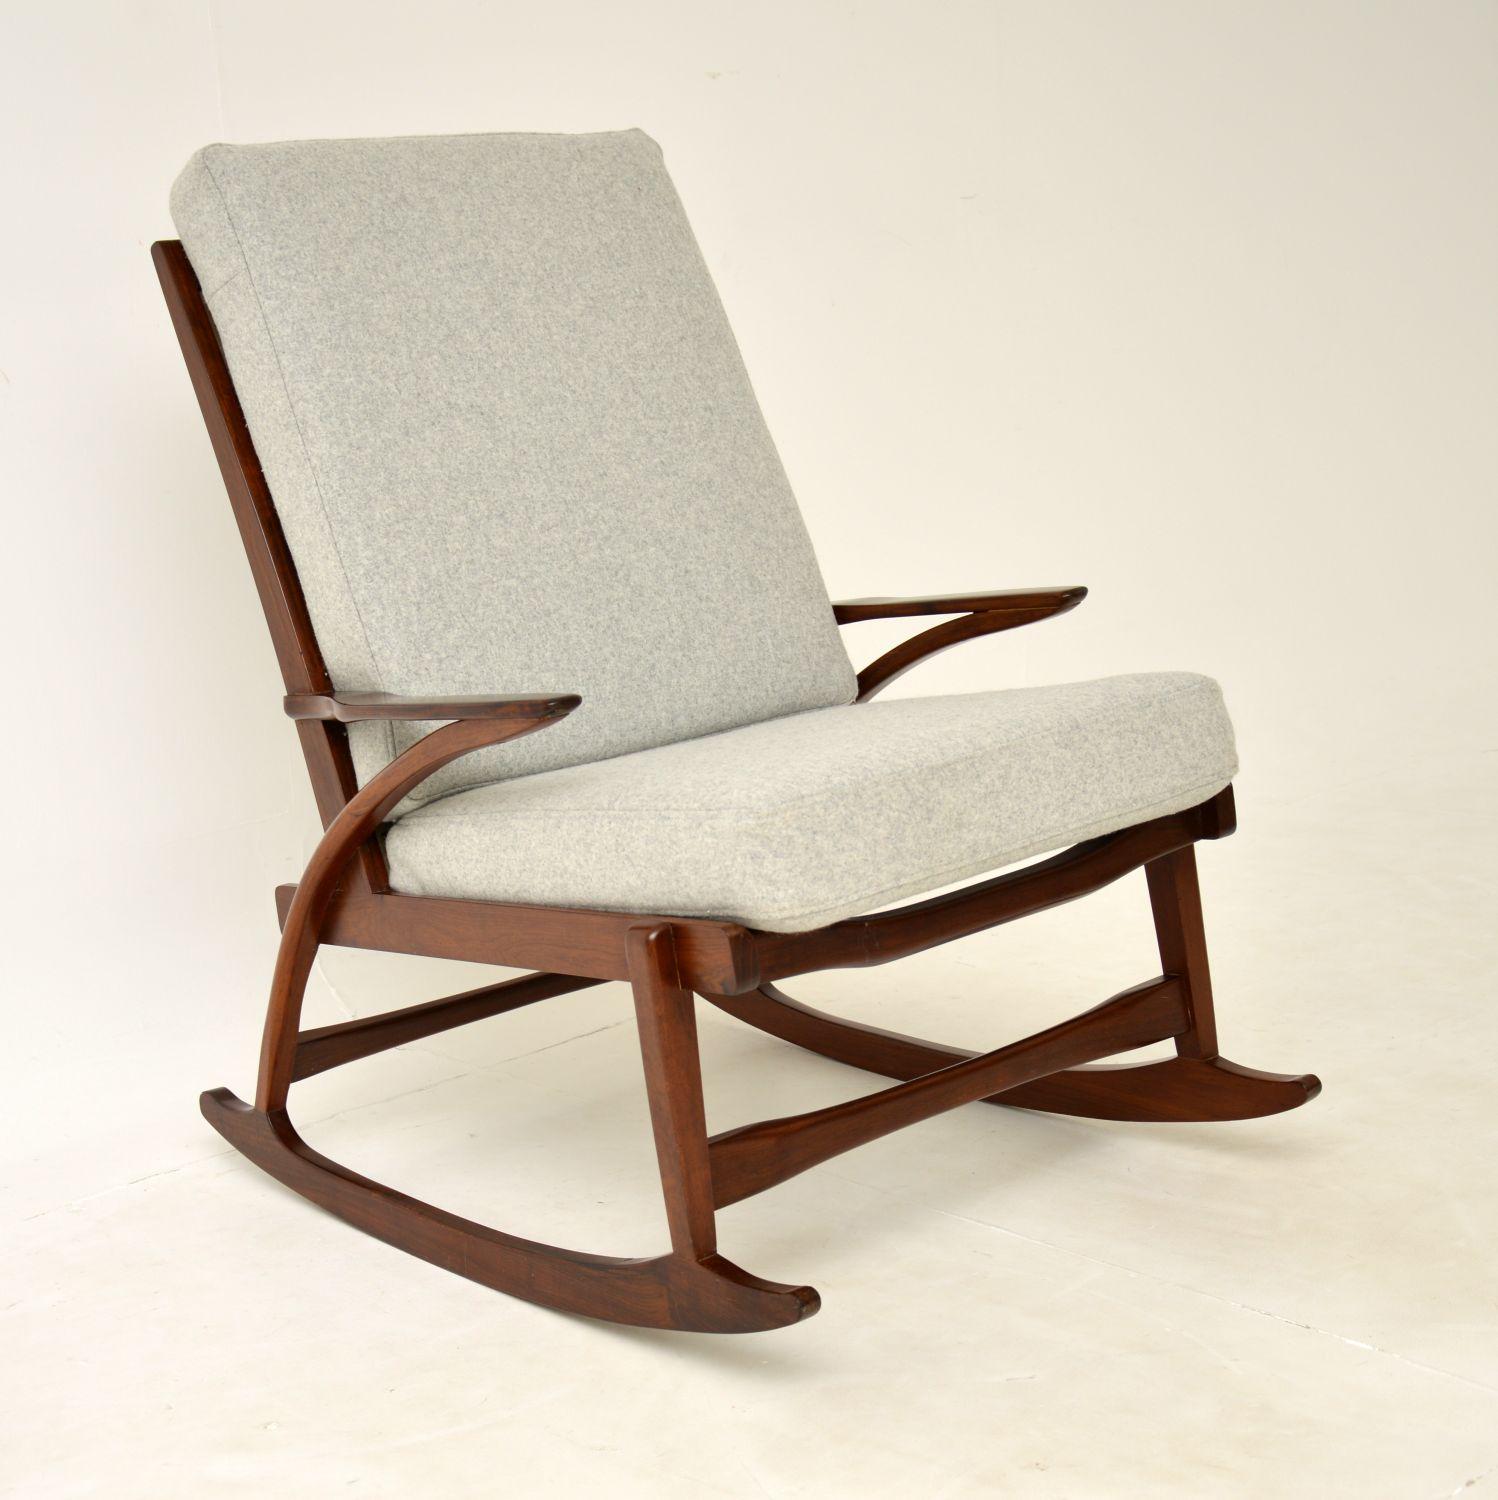 A beautiful vintage Danish rocking chair in solid walnut. This was made in Denmark, it dates from the 1960’s.

The quality is superb, this has a stunning design and is very comfortable. The frame has a gorgeous colour and very striking grain